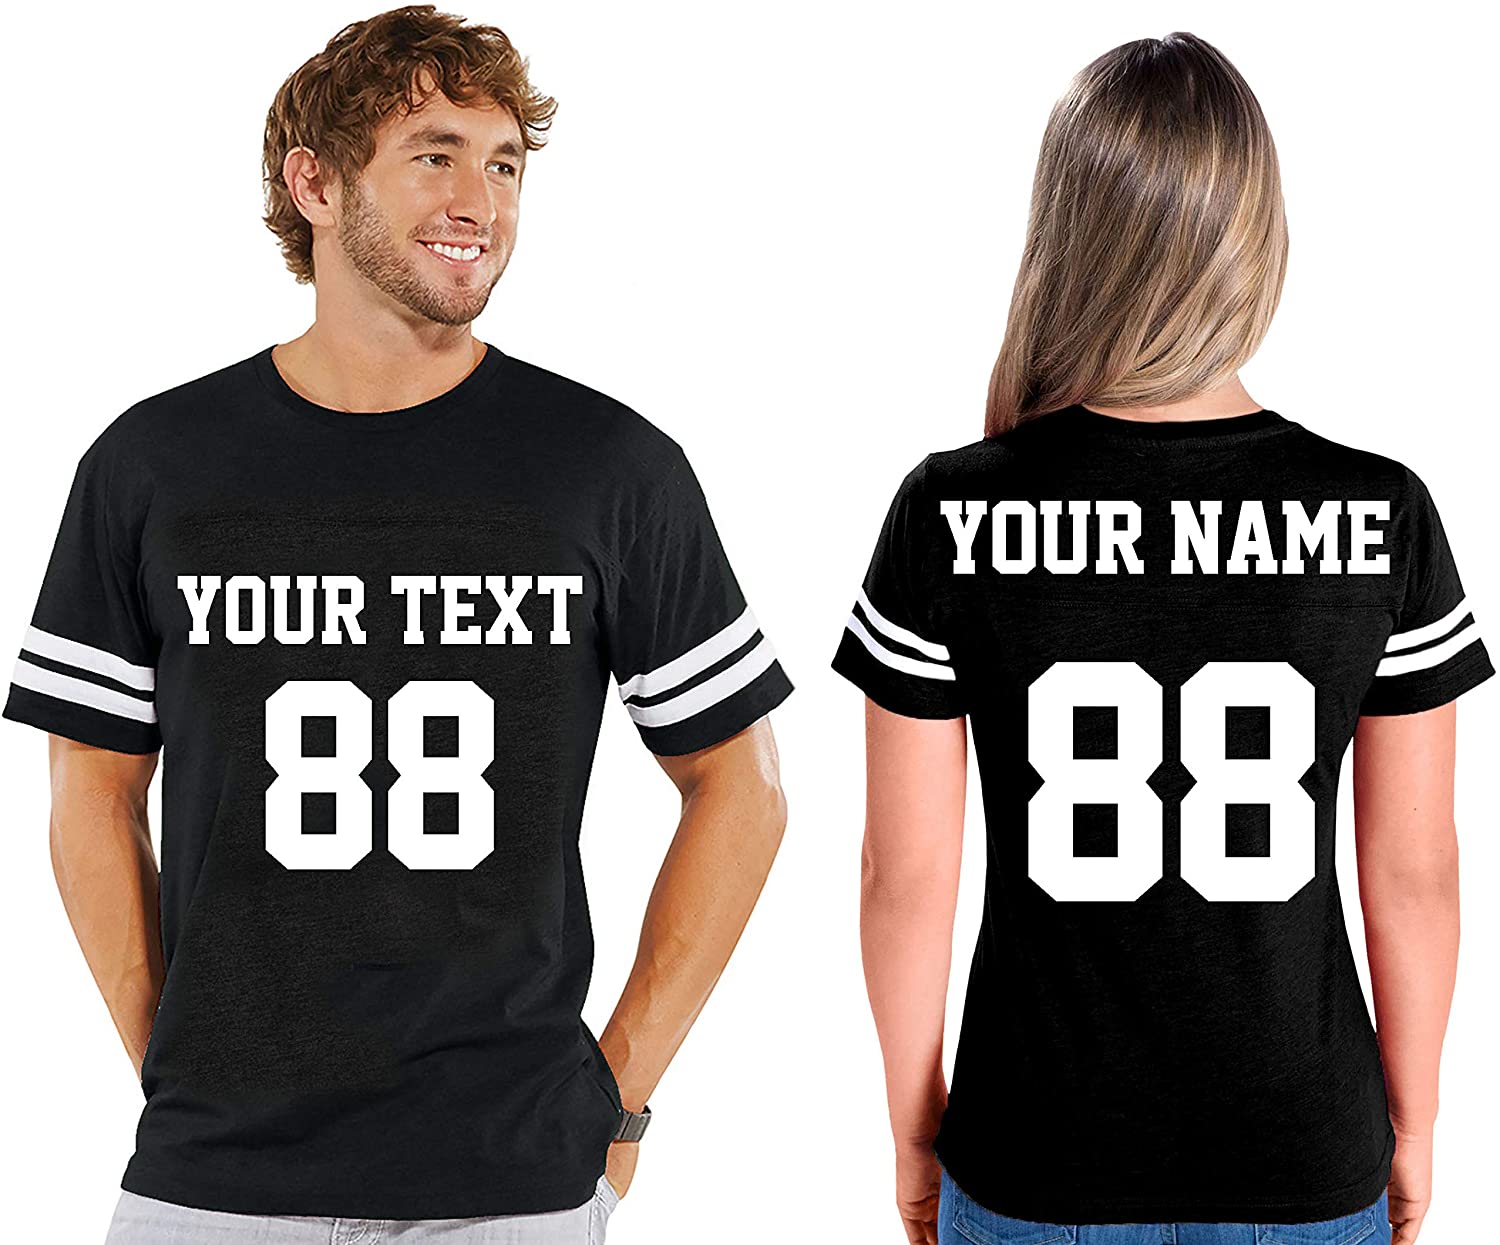 Custom 2 Sided Cotton Jerseys for Men & Women - Personalized Team Uniforms for Casual Outfit Black